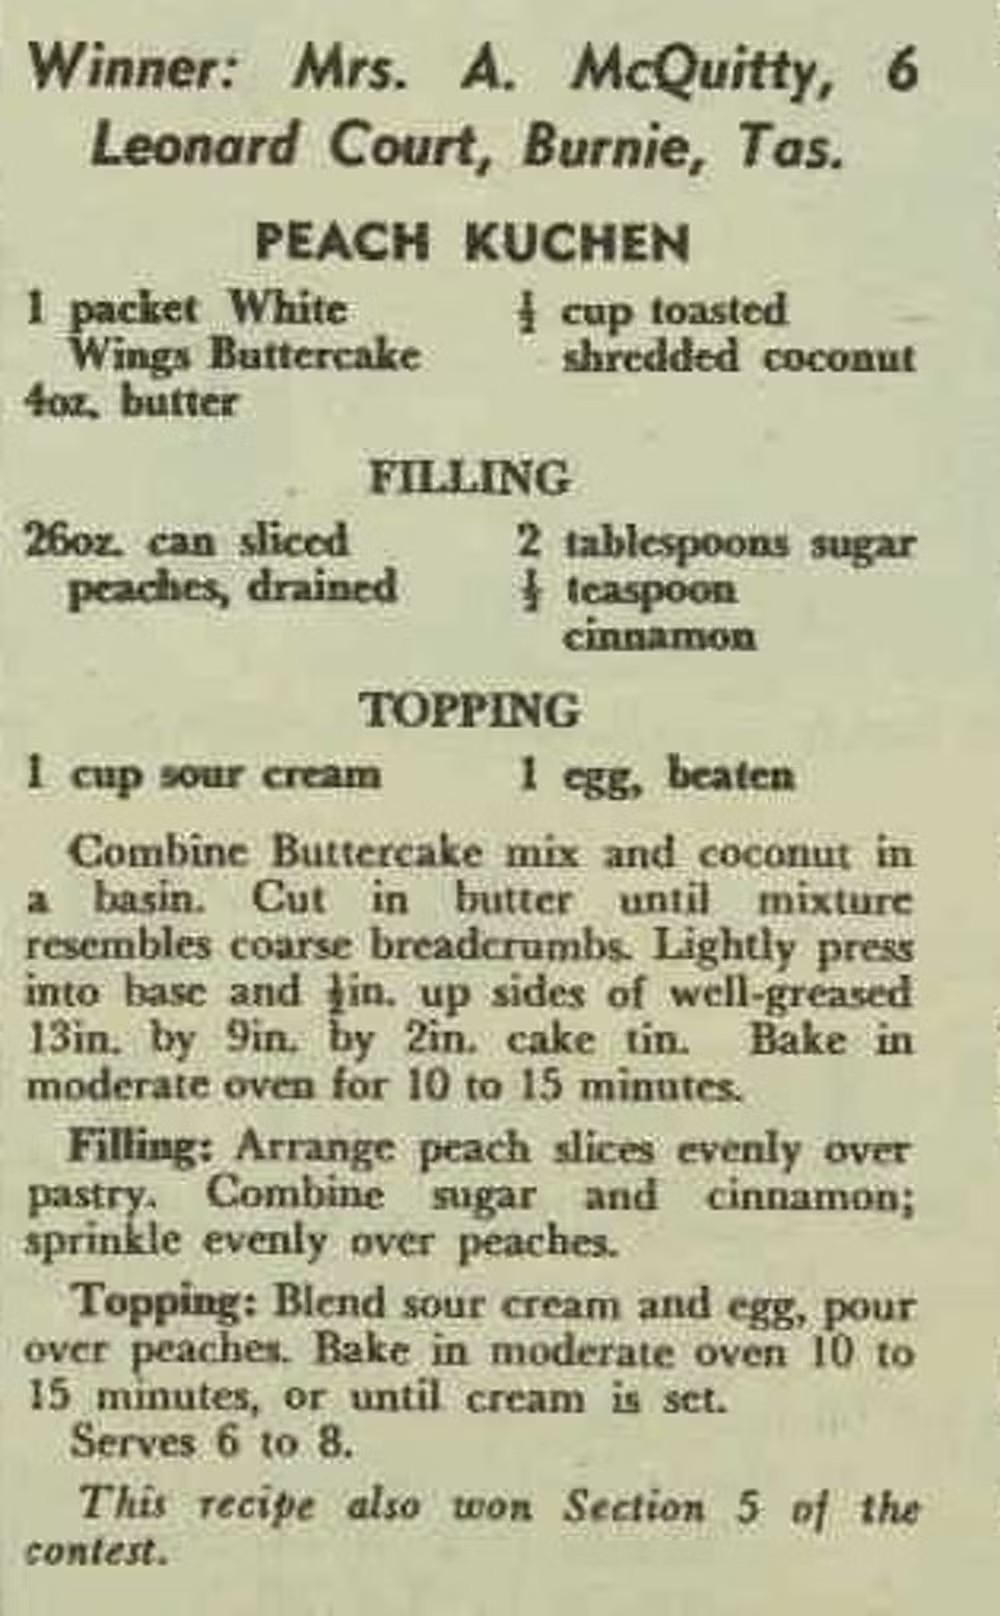 A newspaper clipping with a recipe for Peach Kuchen from competition winner Mrs A McQuitty